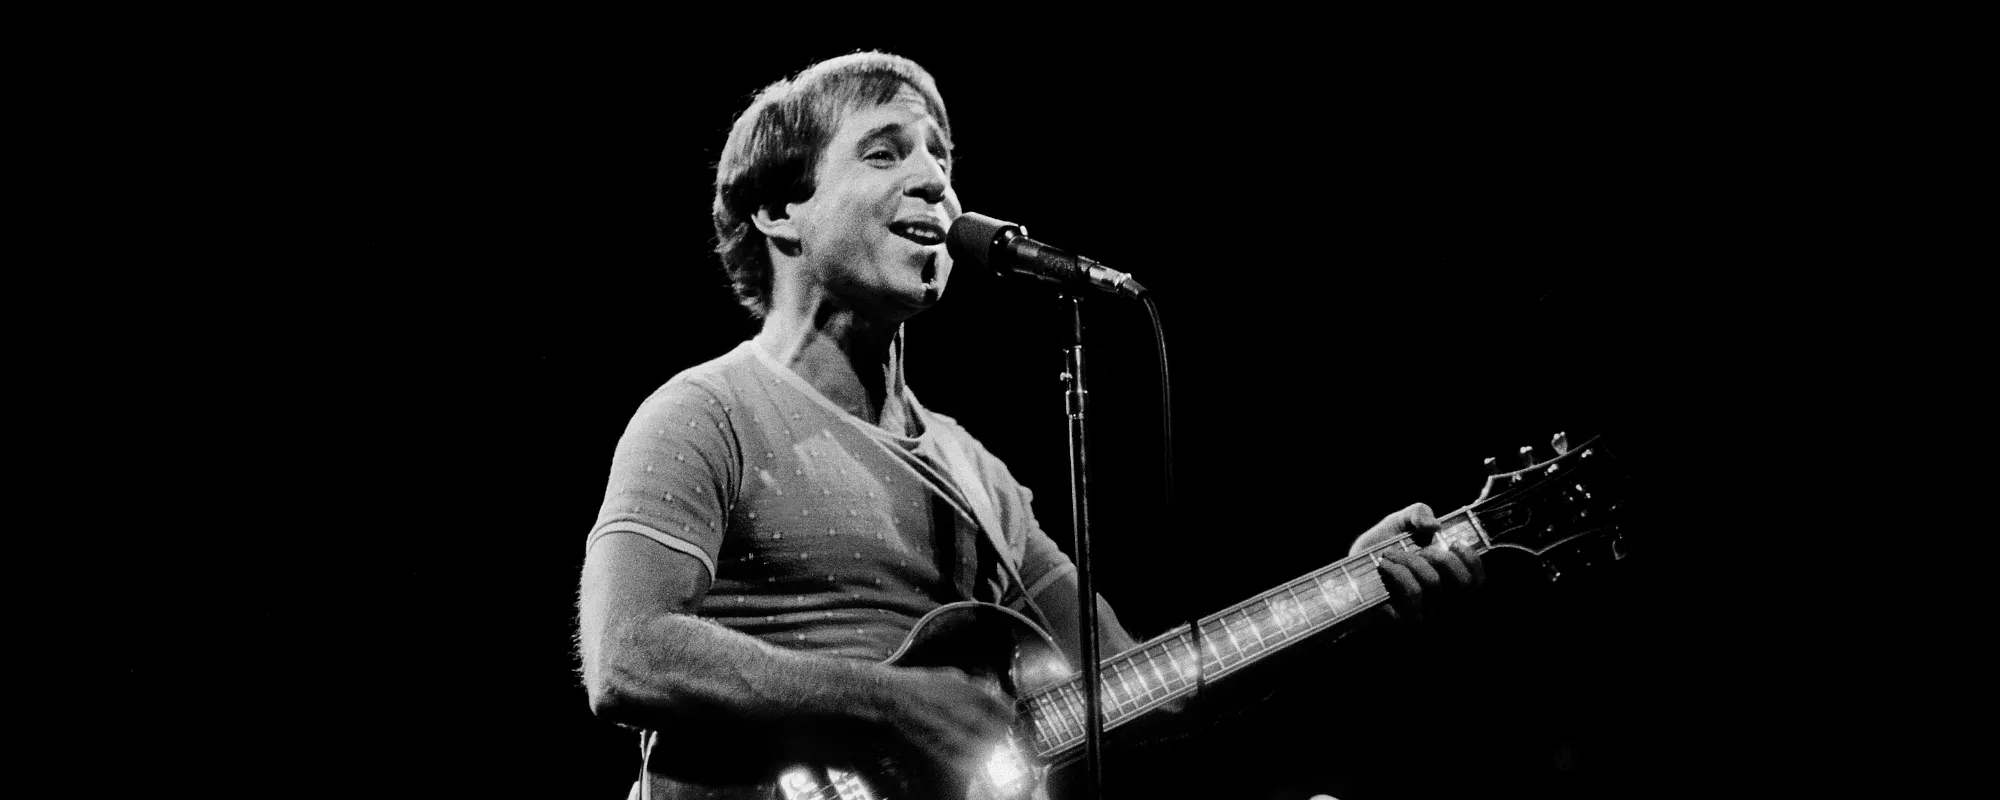 5 Songs You Didn’t Know That Sampled Paul Simon